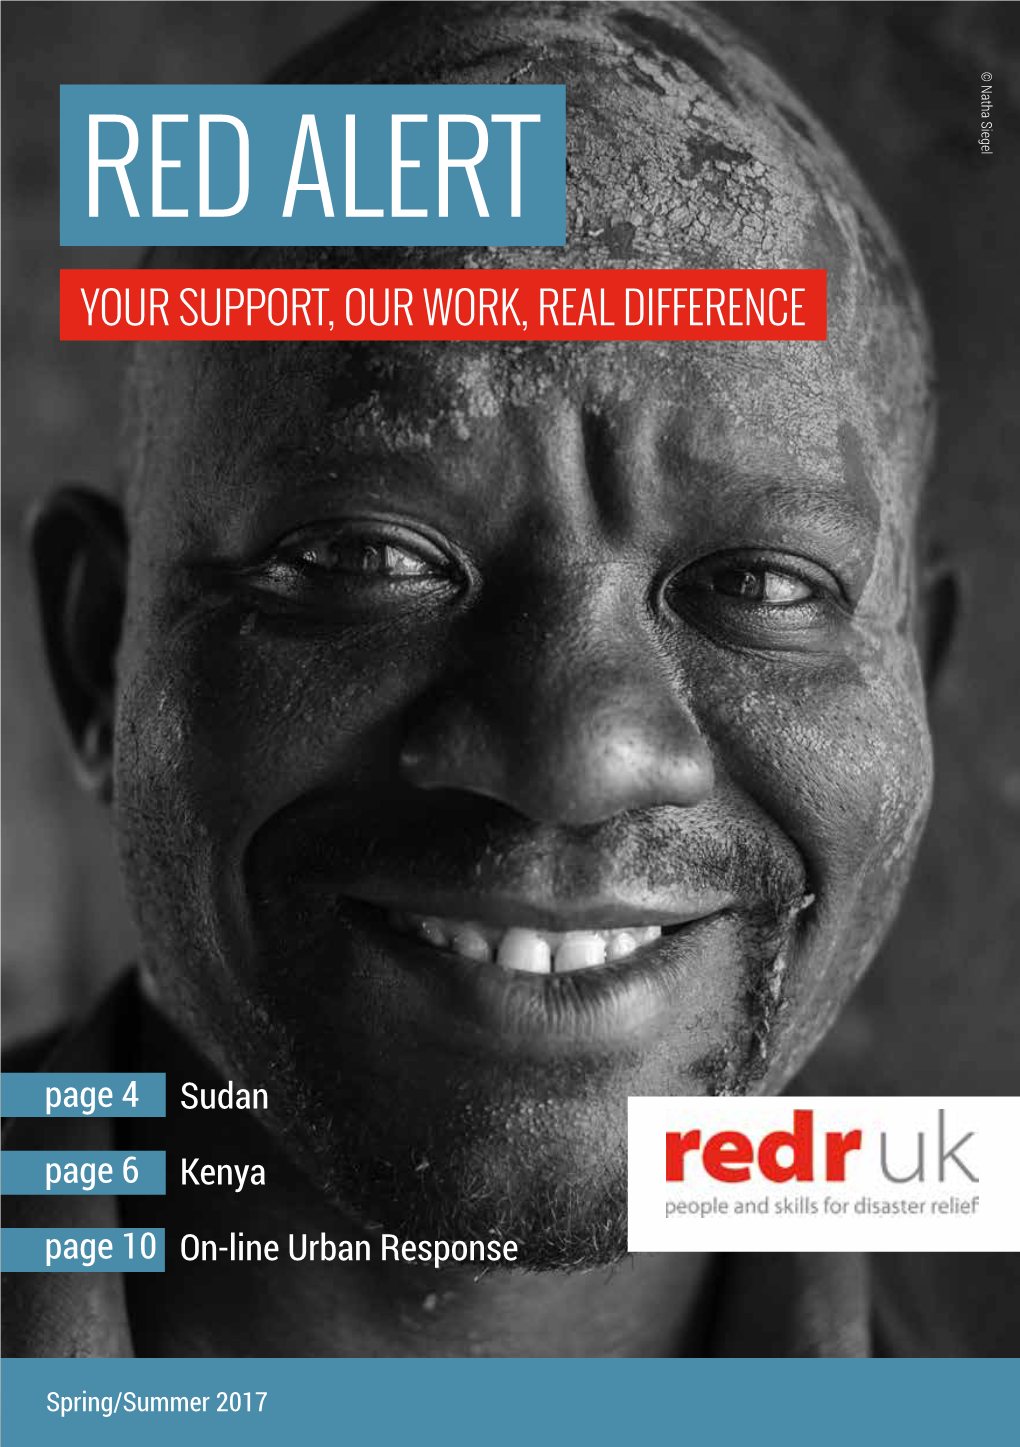 Red Alert Your Support, Our Work, Real Difference